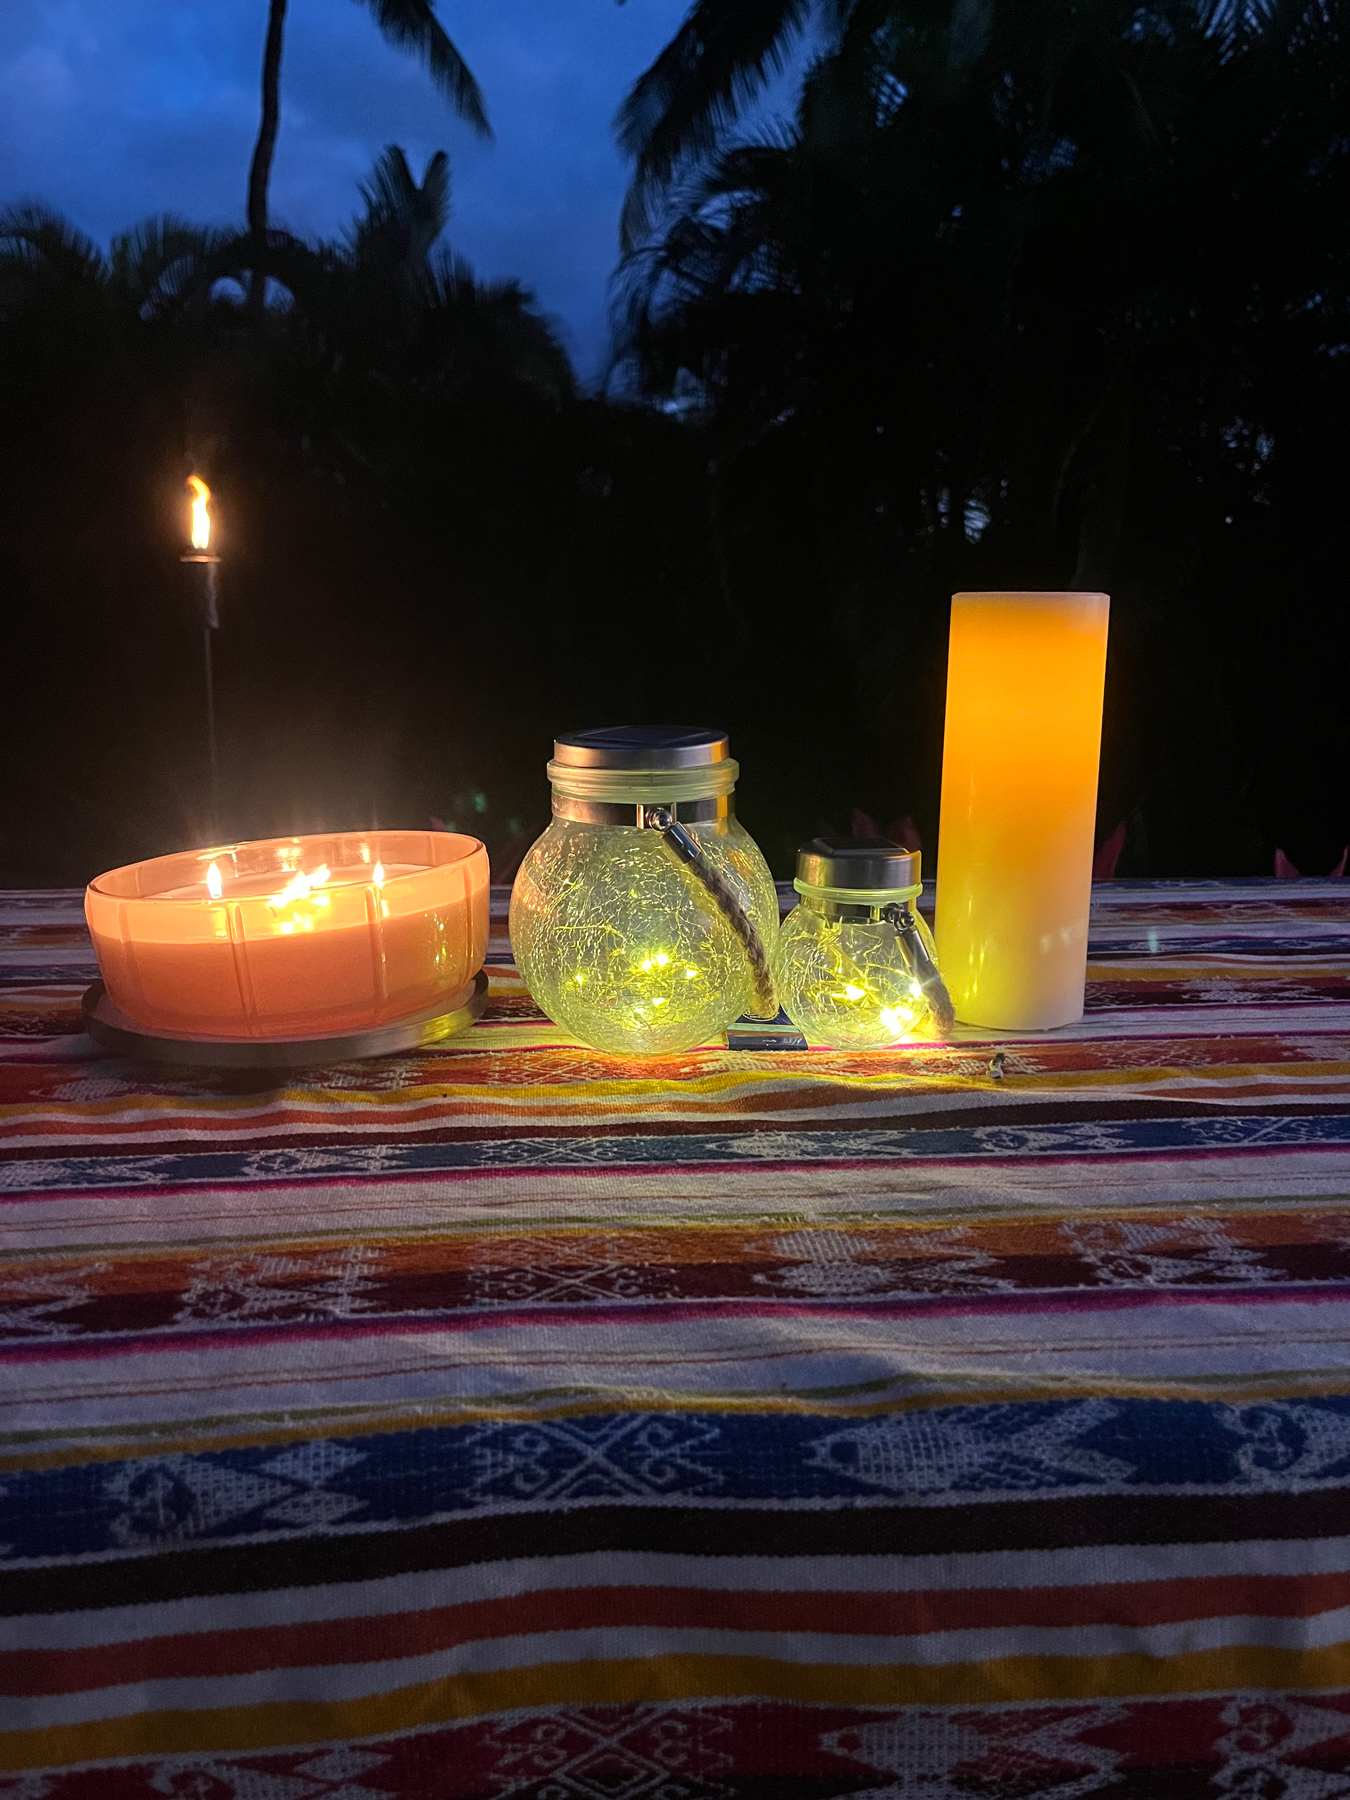 A collection of lit candles and string lights set on a vibrant, multicolored textile surface outdoors at dusk, with silhouettes of palm trees in the background.